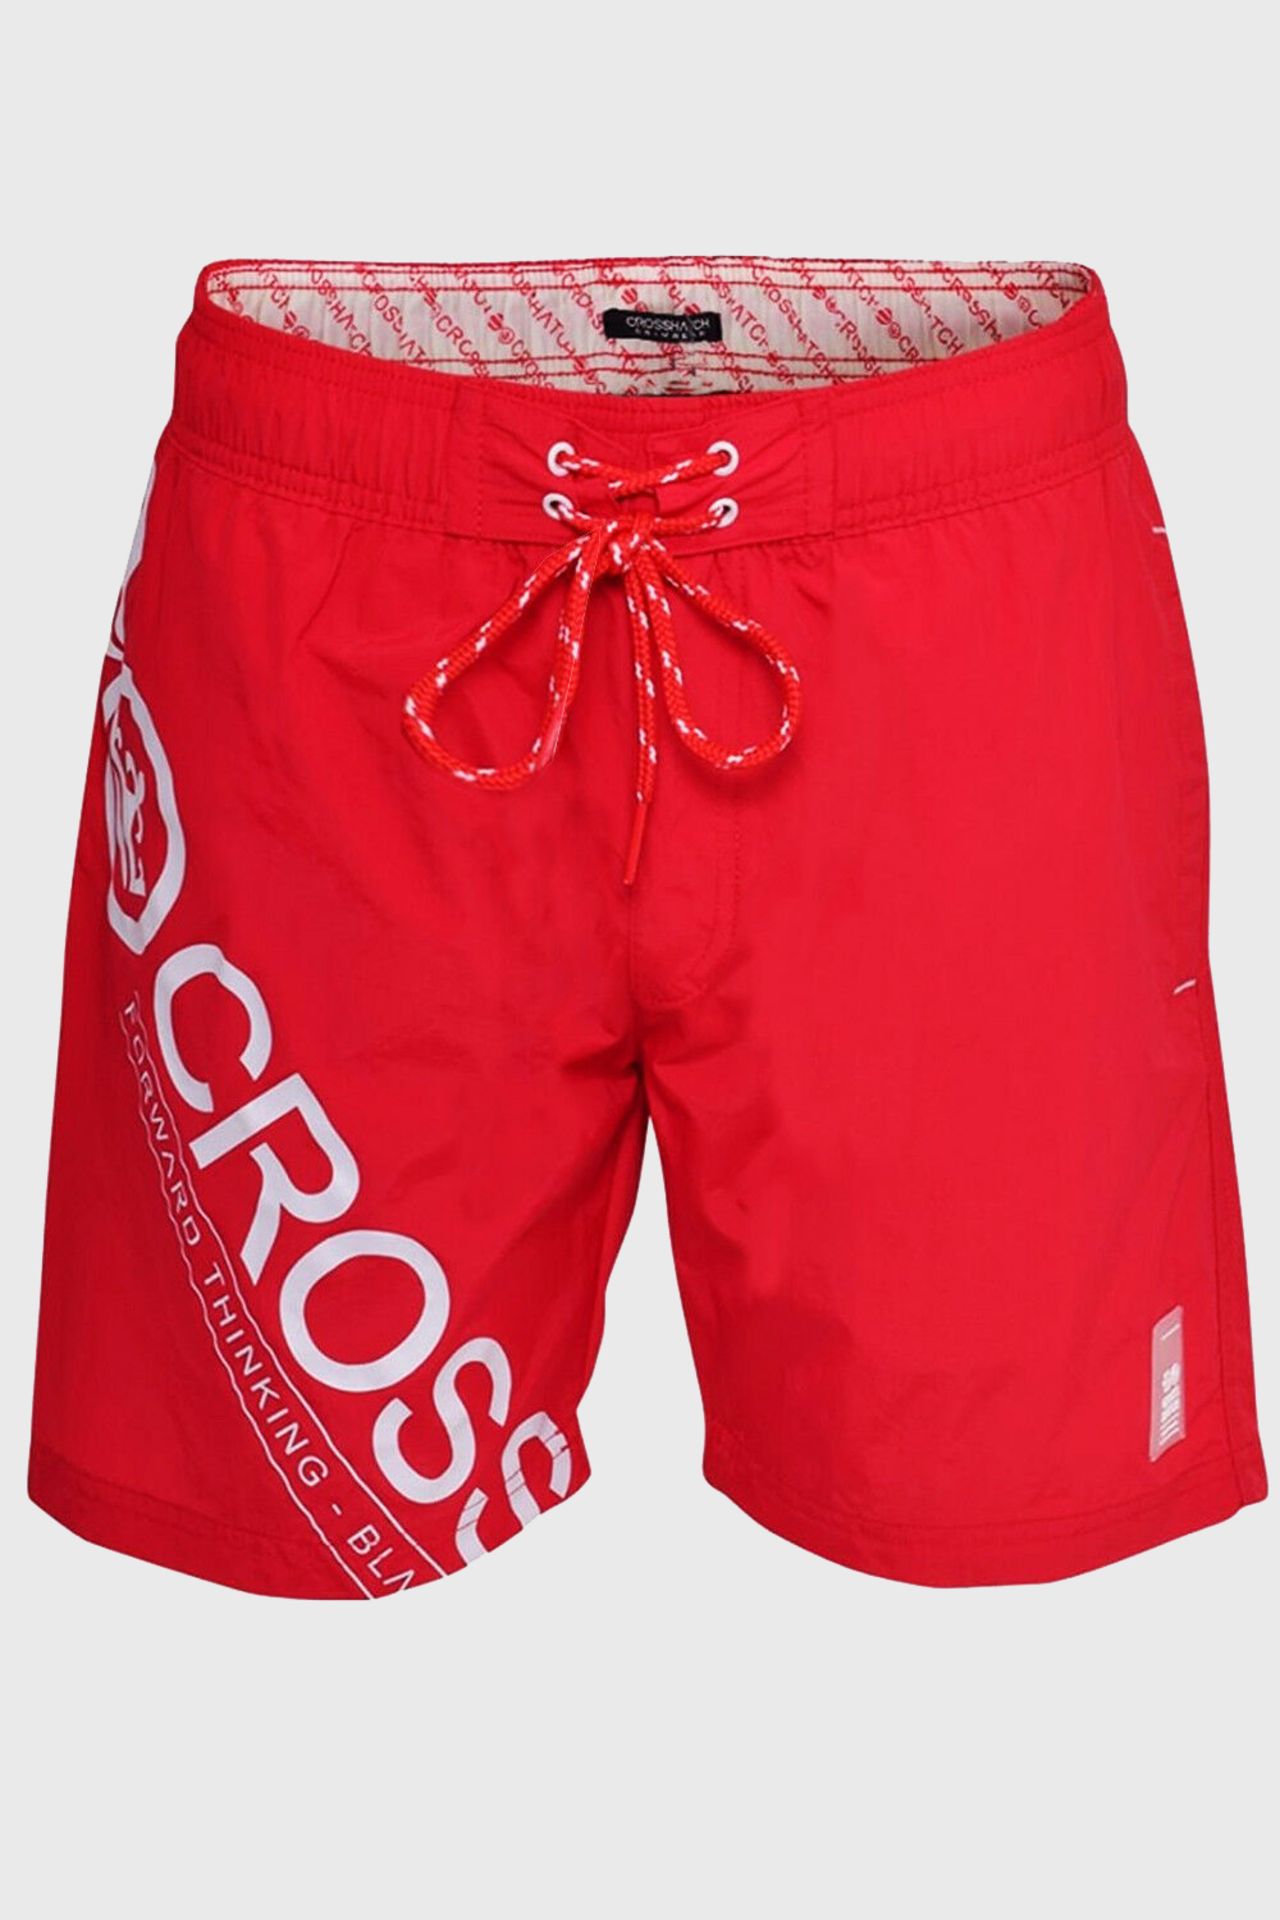 13 X BRAND NEW CROSSHATCH MESH LINED SWIM SHORTS WITH LOGO - IN RED) - ( RRP £ 24.99 EACH ) ALL IN